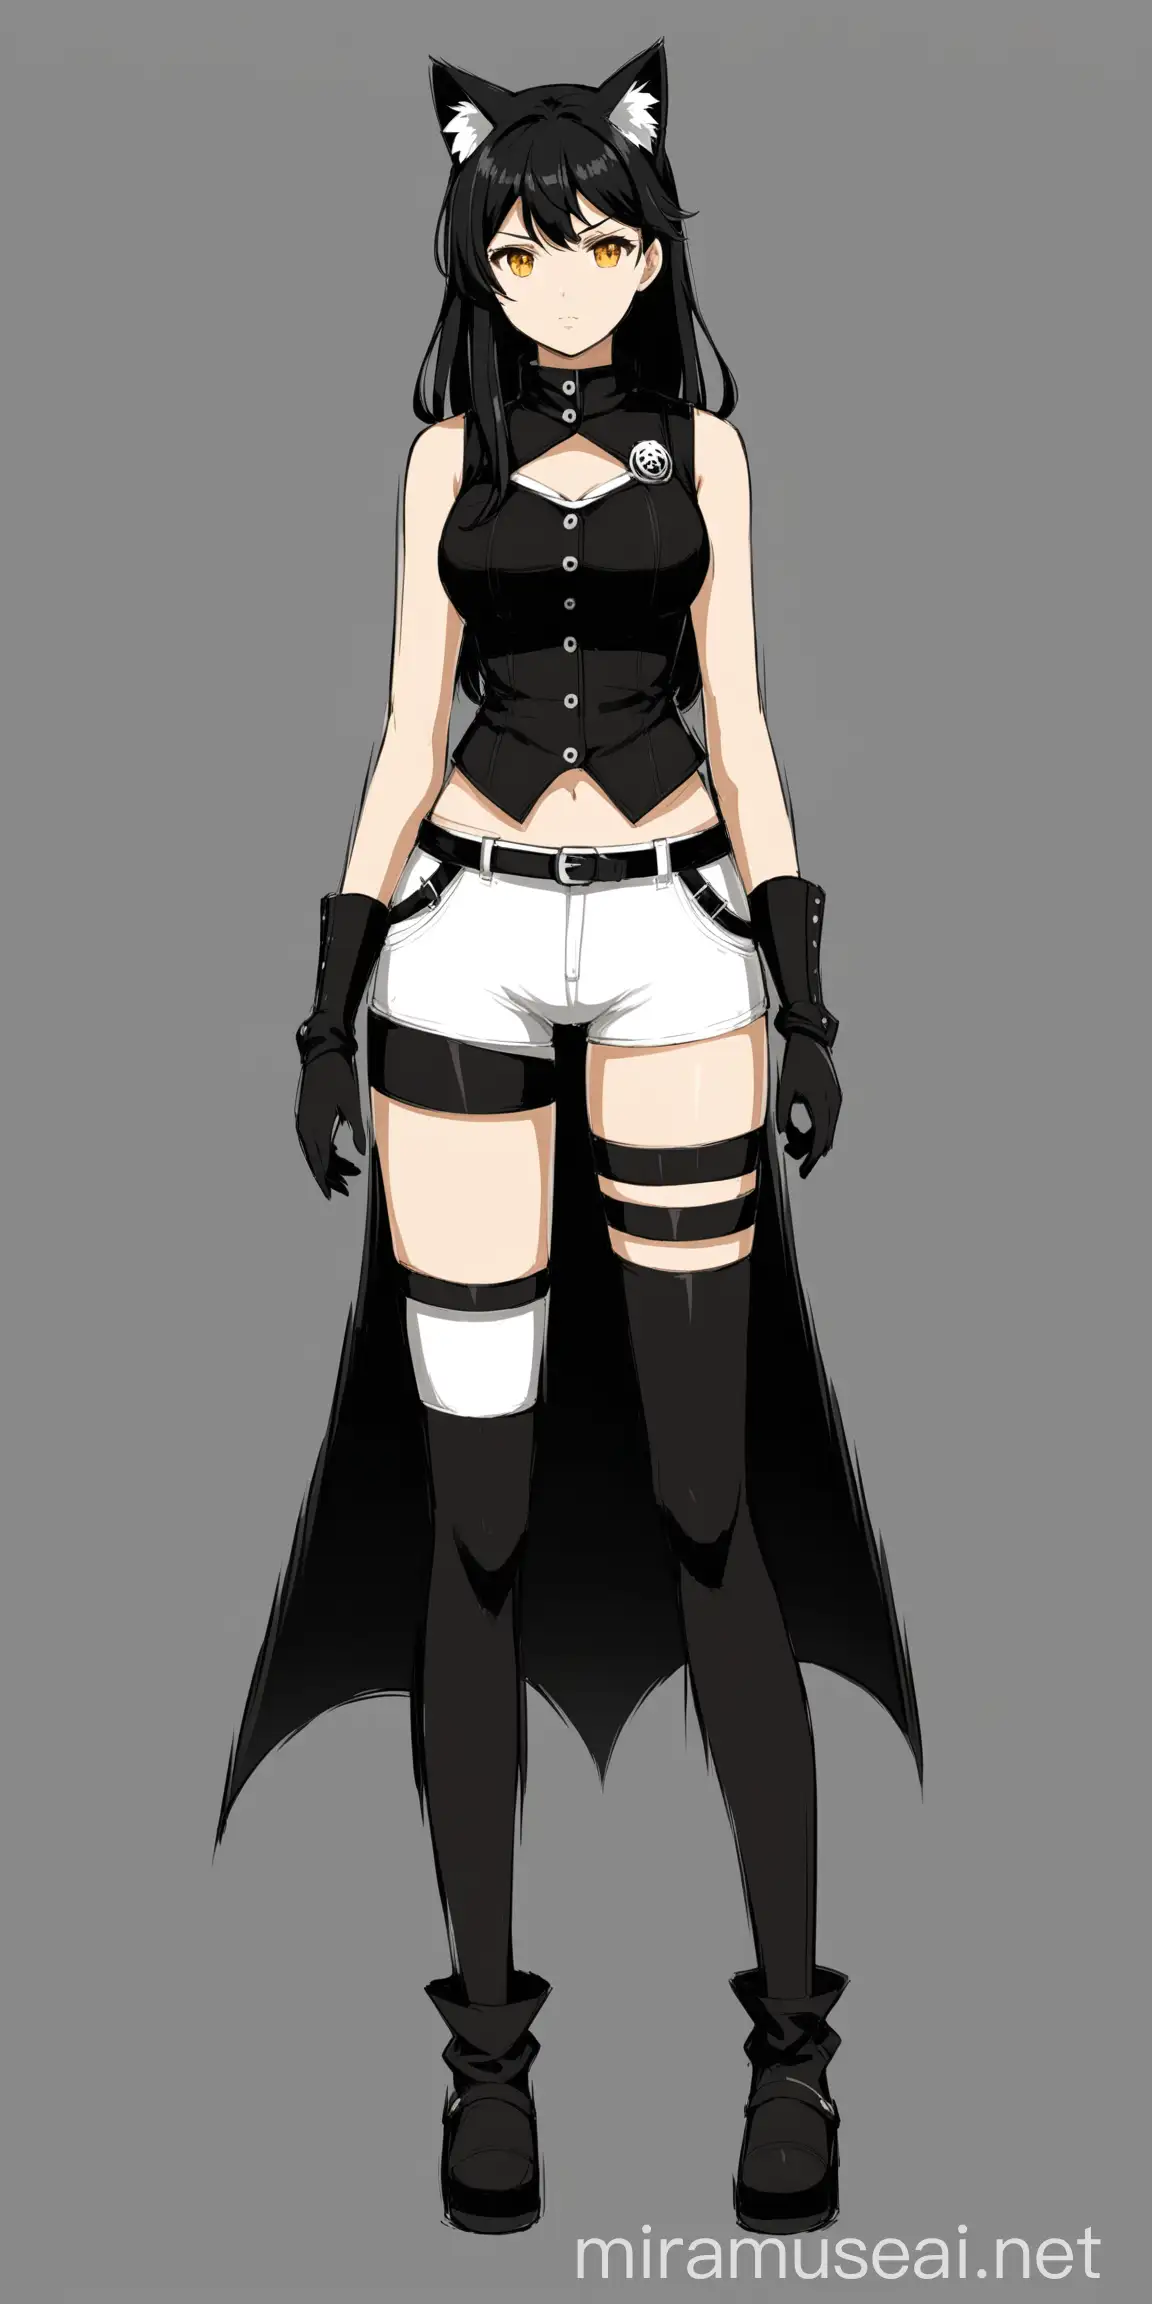 anime, Blake Belladonna, rwby, black and white outfit, white shorts, black stockings, cat ears, amber eyes, white top, black buttoned vest with coattails, white sleeveless high necked crop undershirt, tight white spandex compression shorts that reach her upper thighs, full body, standing, cold, calm, no background